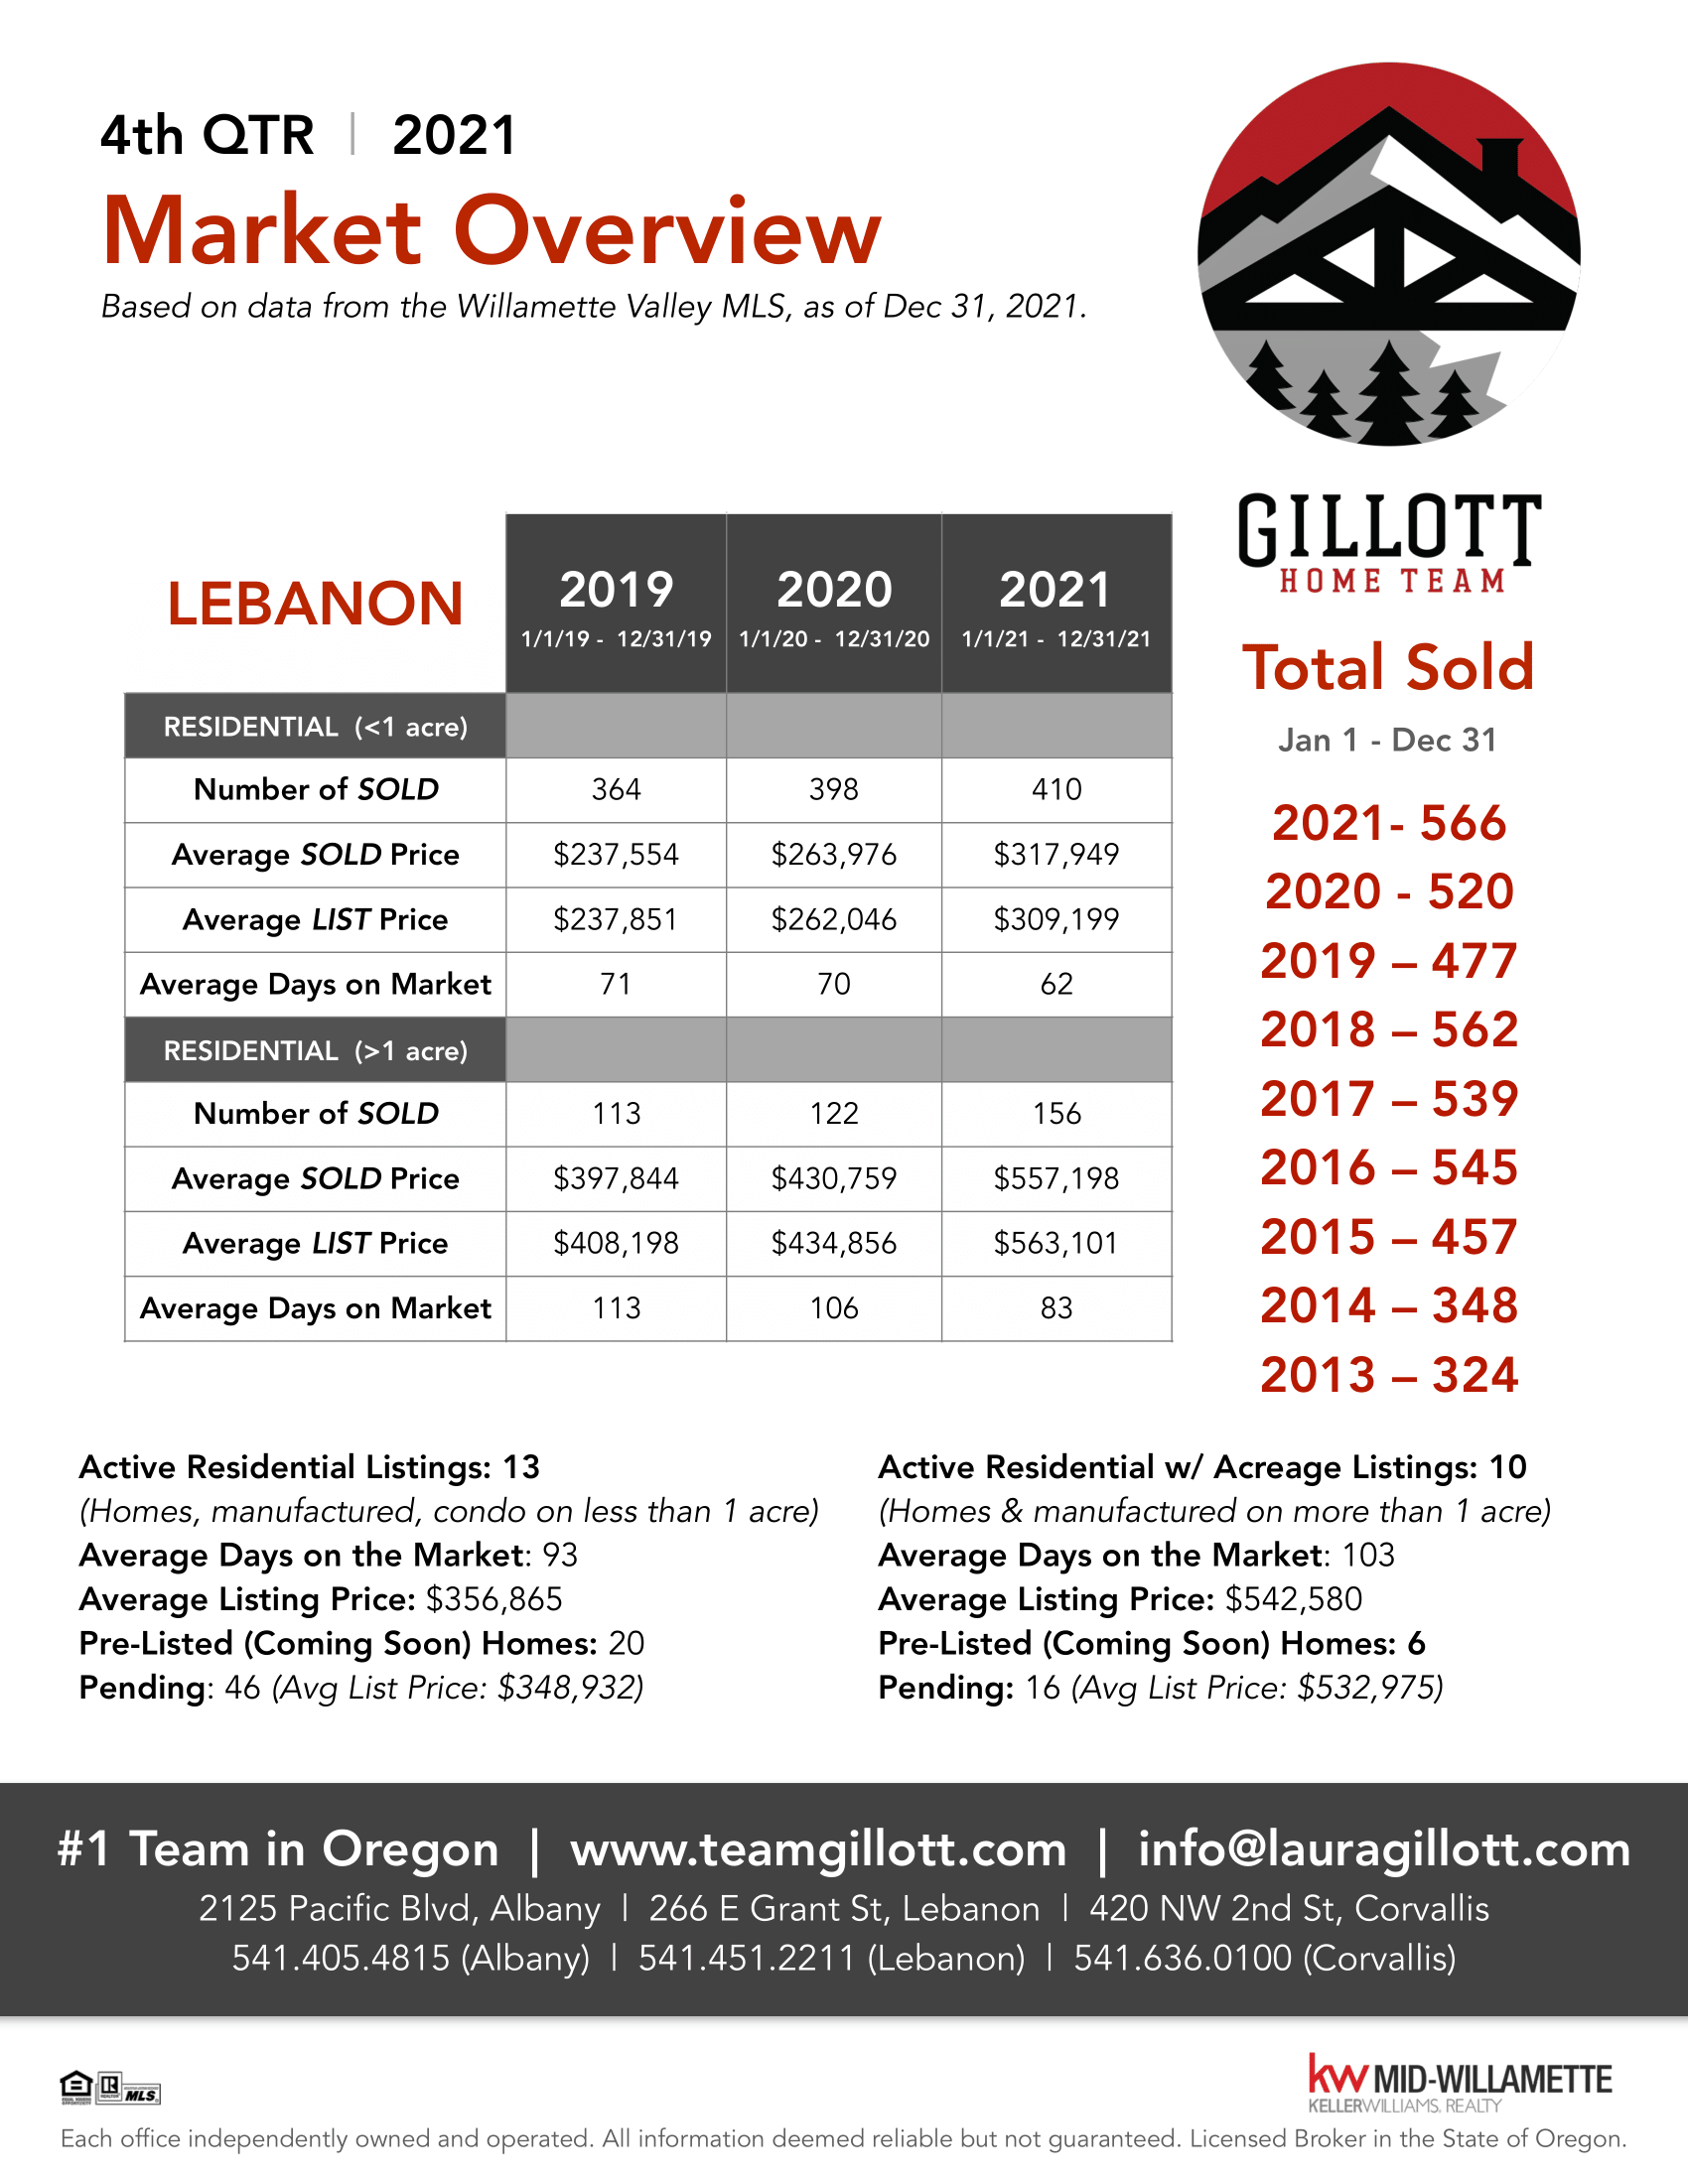 4th Qtr Lebanon 2021 PDF updated-1.png